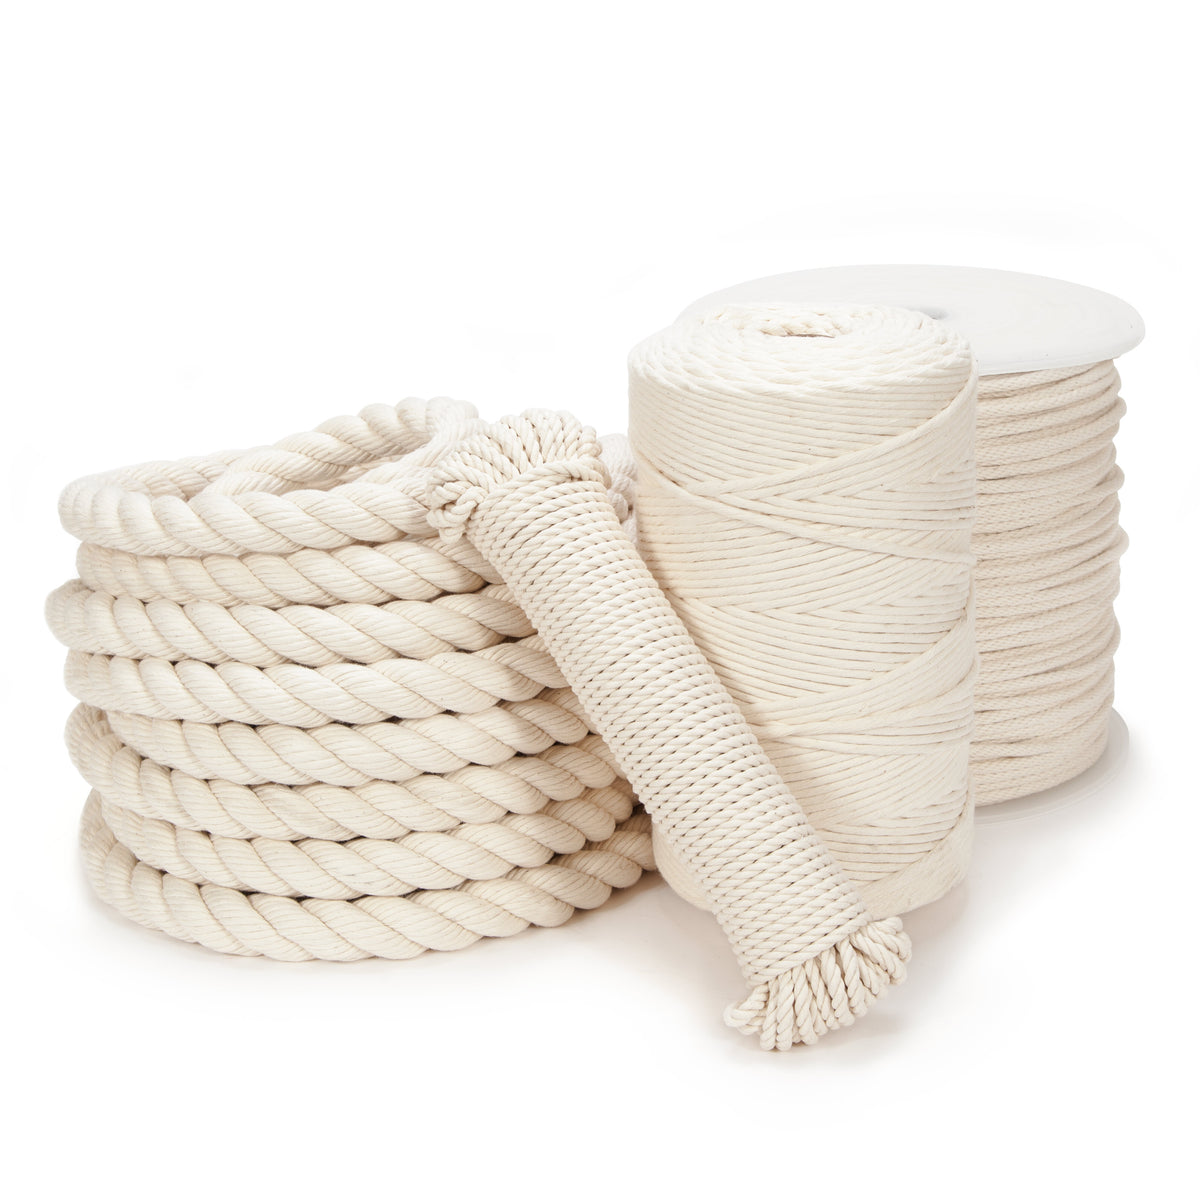 Raw Natural Cotton String (3 mm, 5 mm, 7 mm)